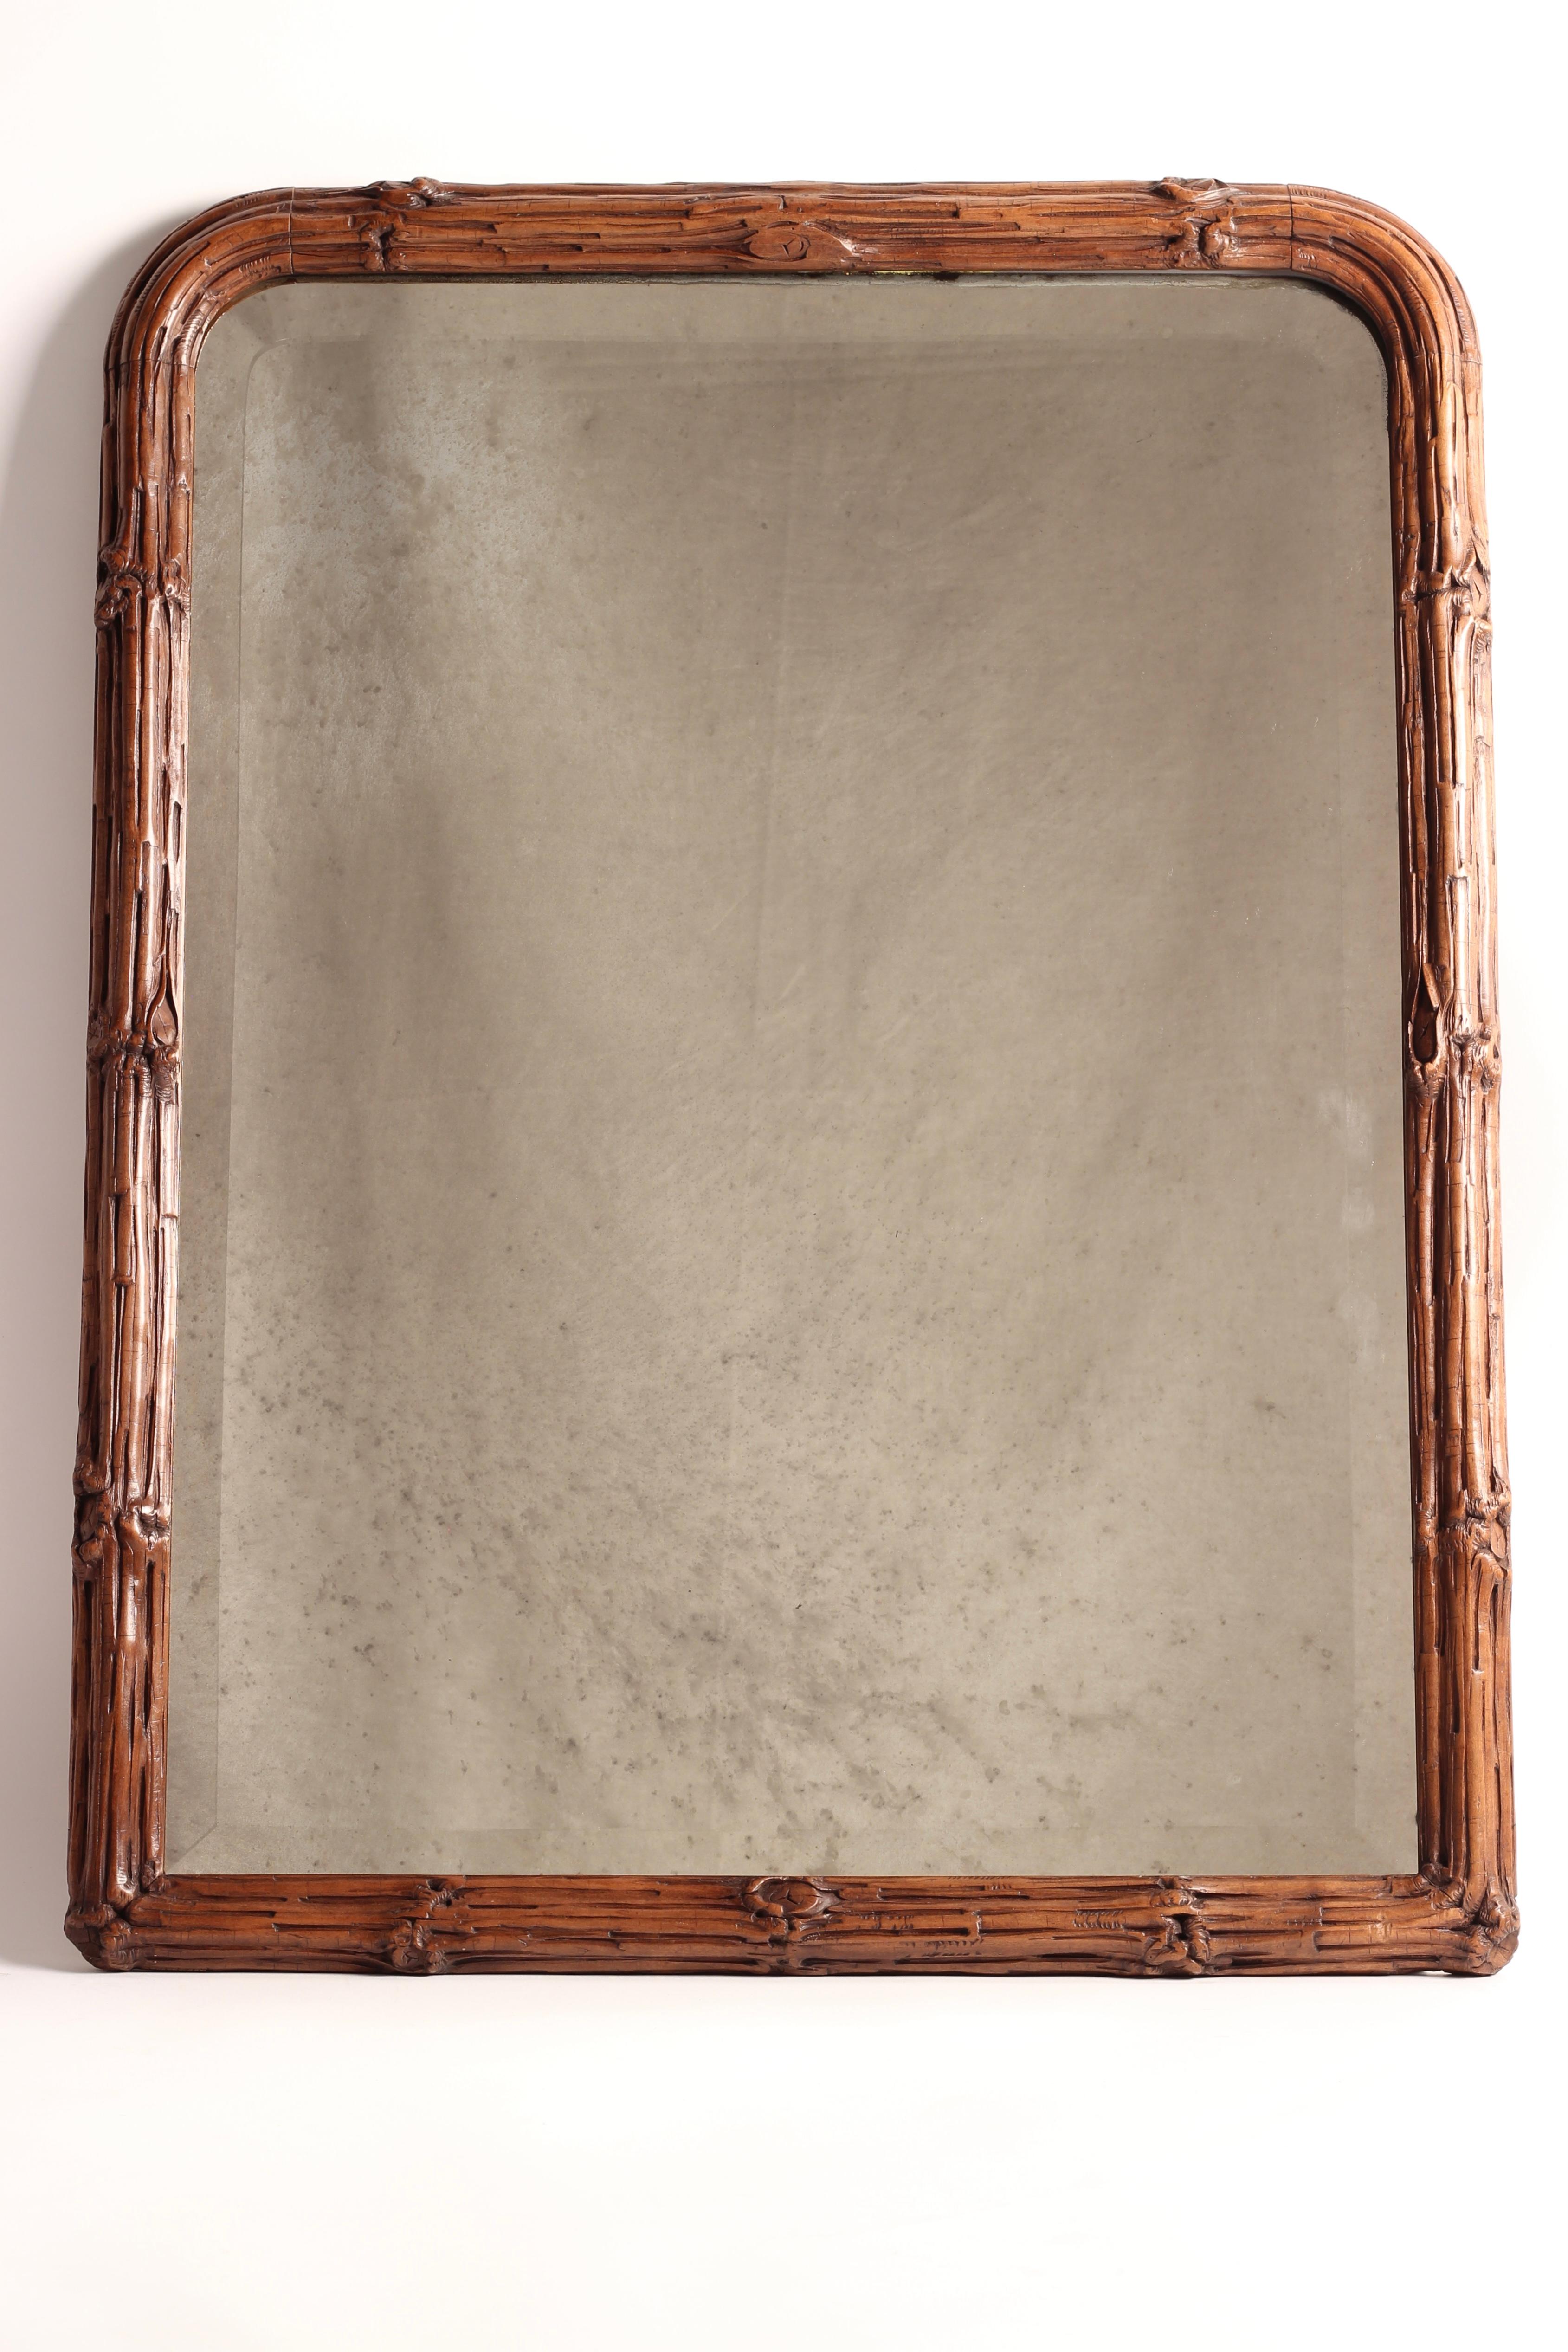 Black Forest Mirror in Lindenwood Hand Carved Tree Branches in the Folk Style For Sale 9